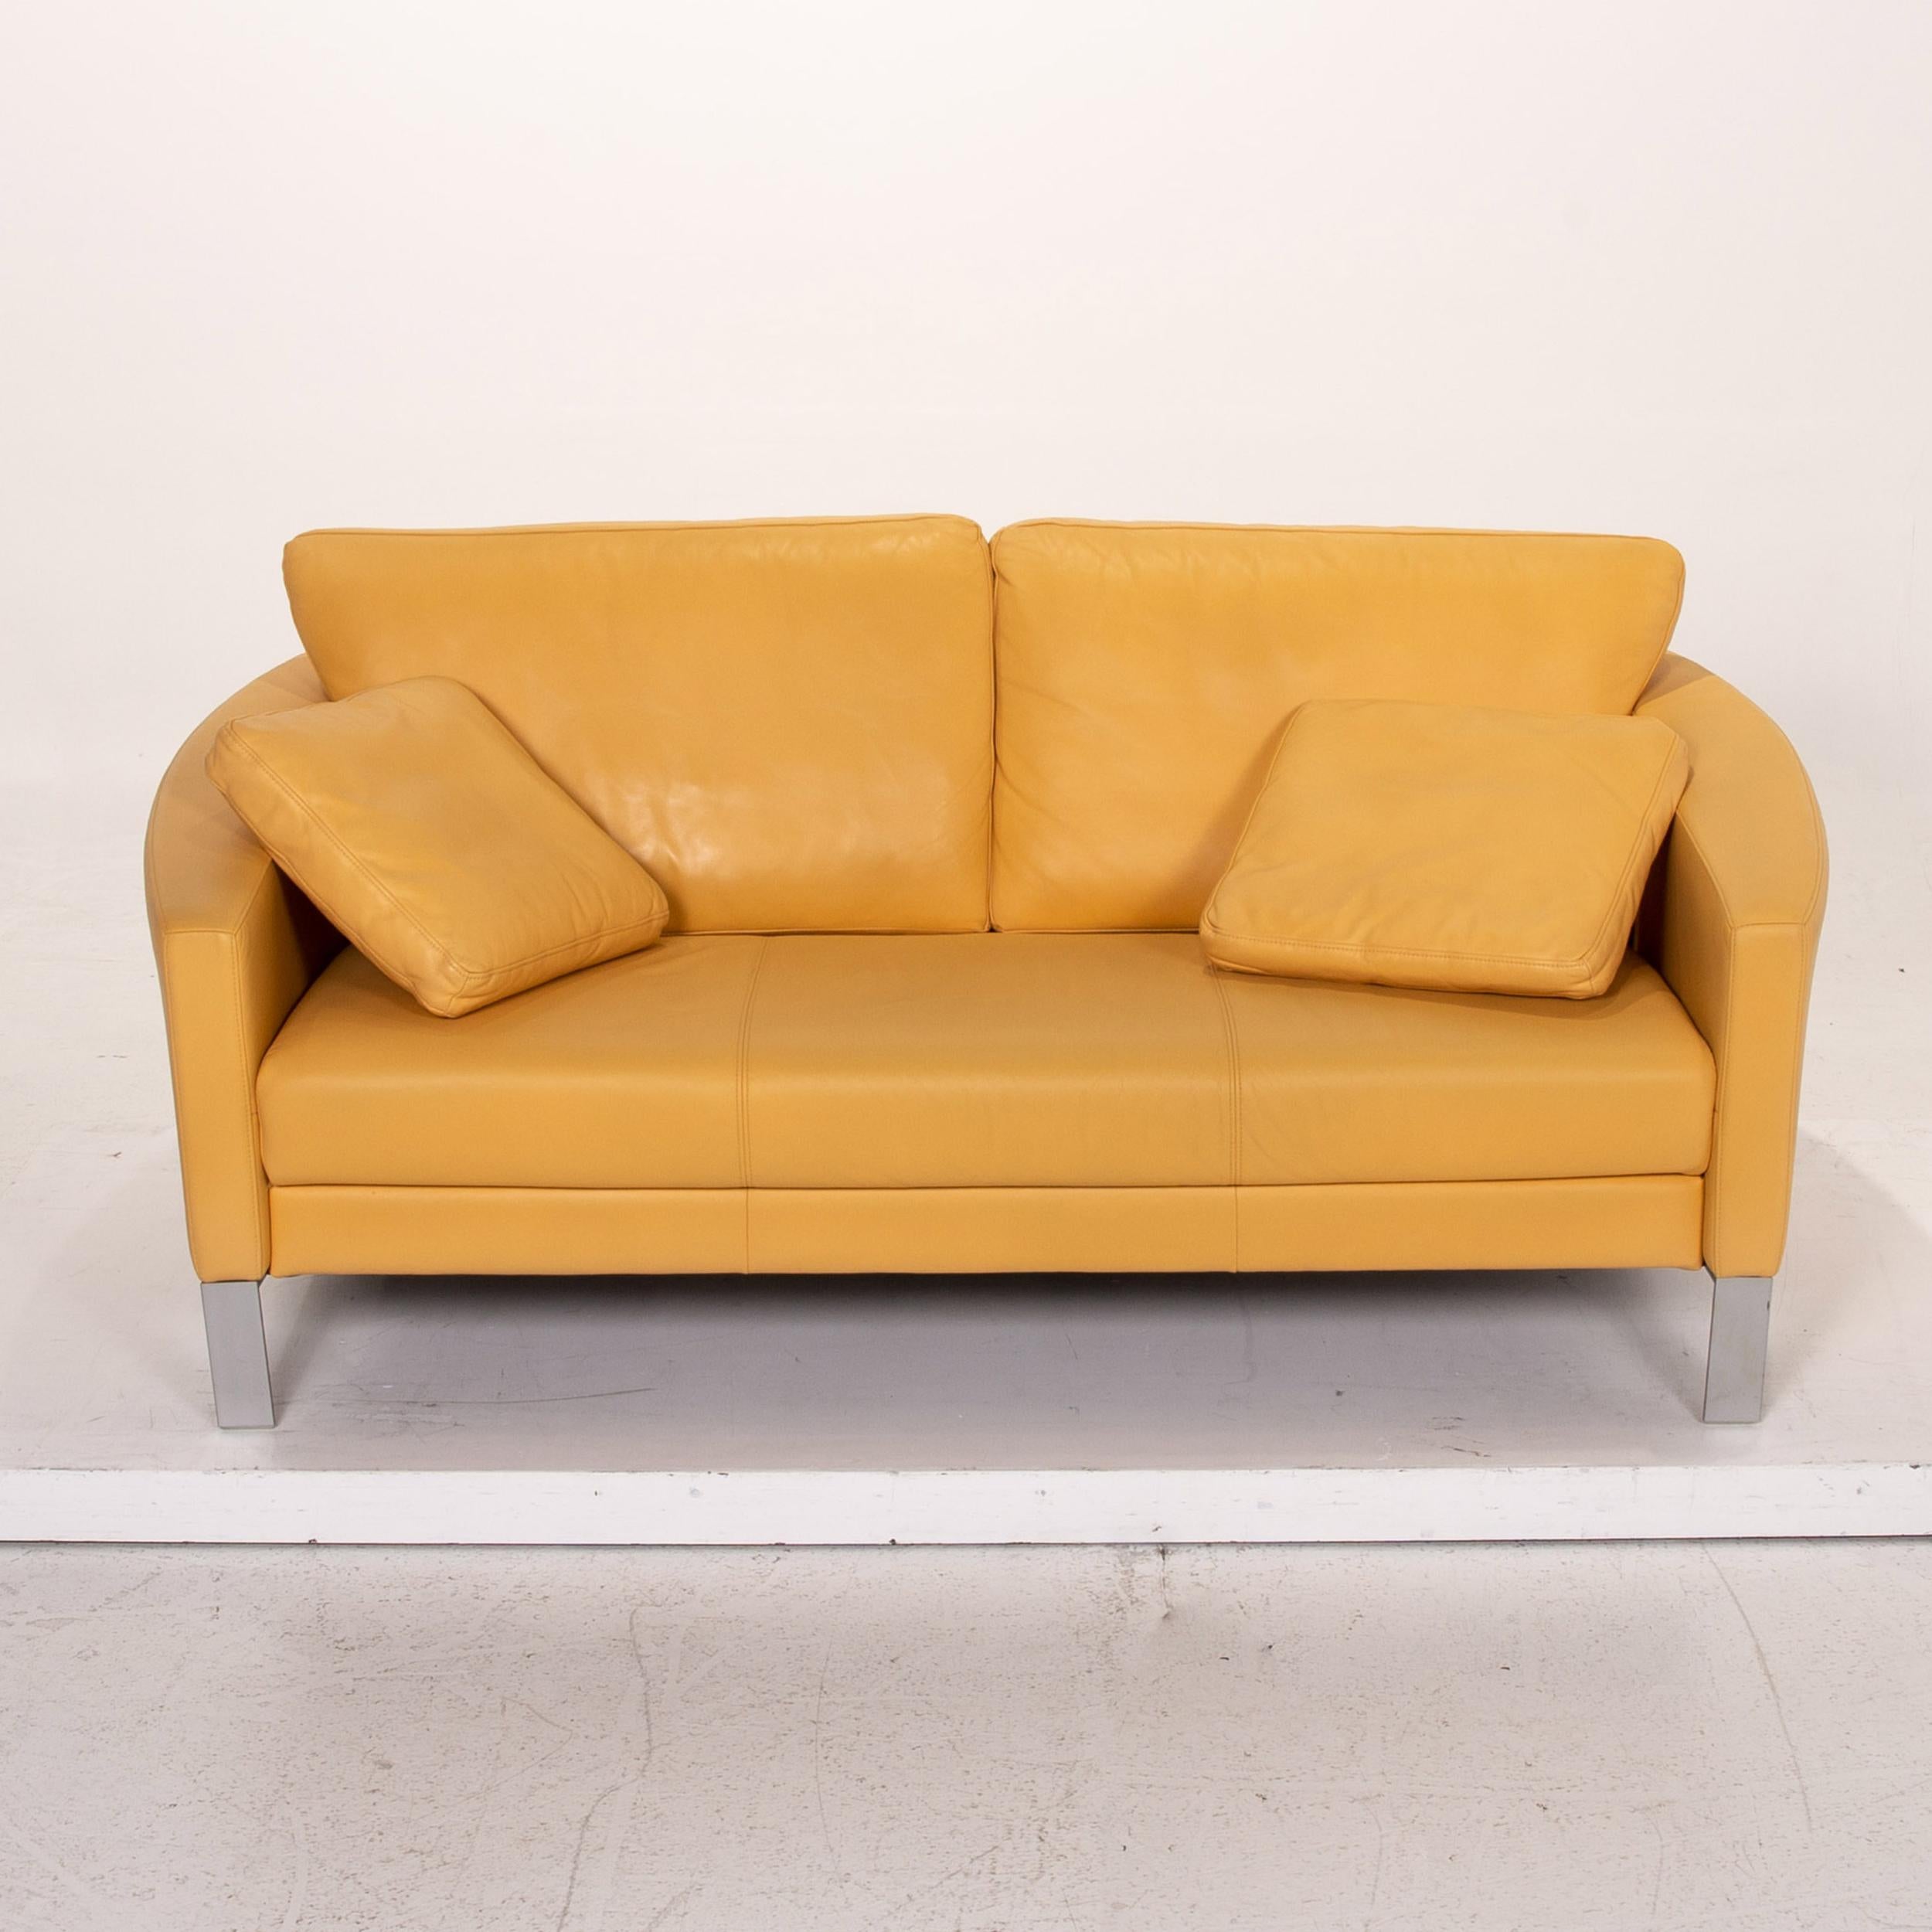 Rolf Benz Leather Sofa Yellow Two-Seat Couch In Good Condition For Sale In Cologne, DE